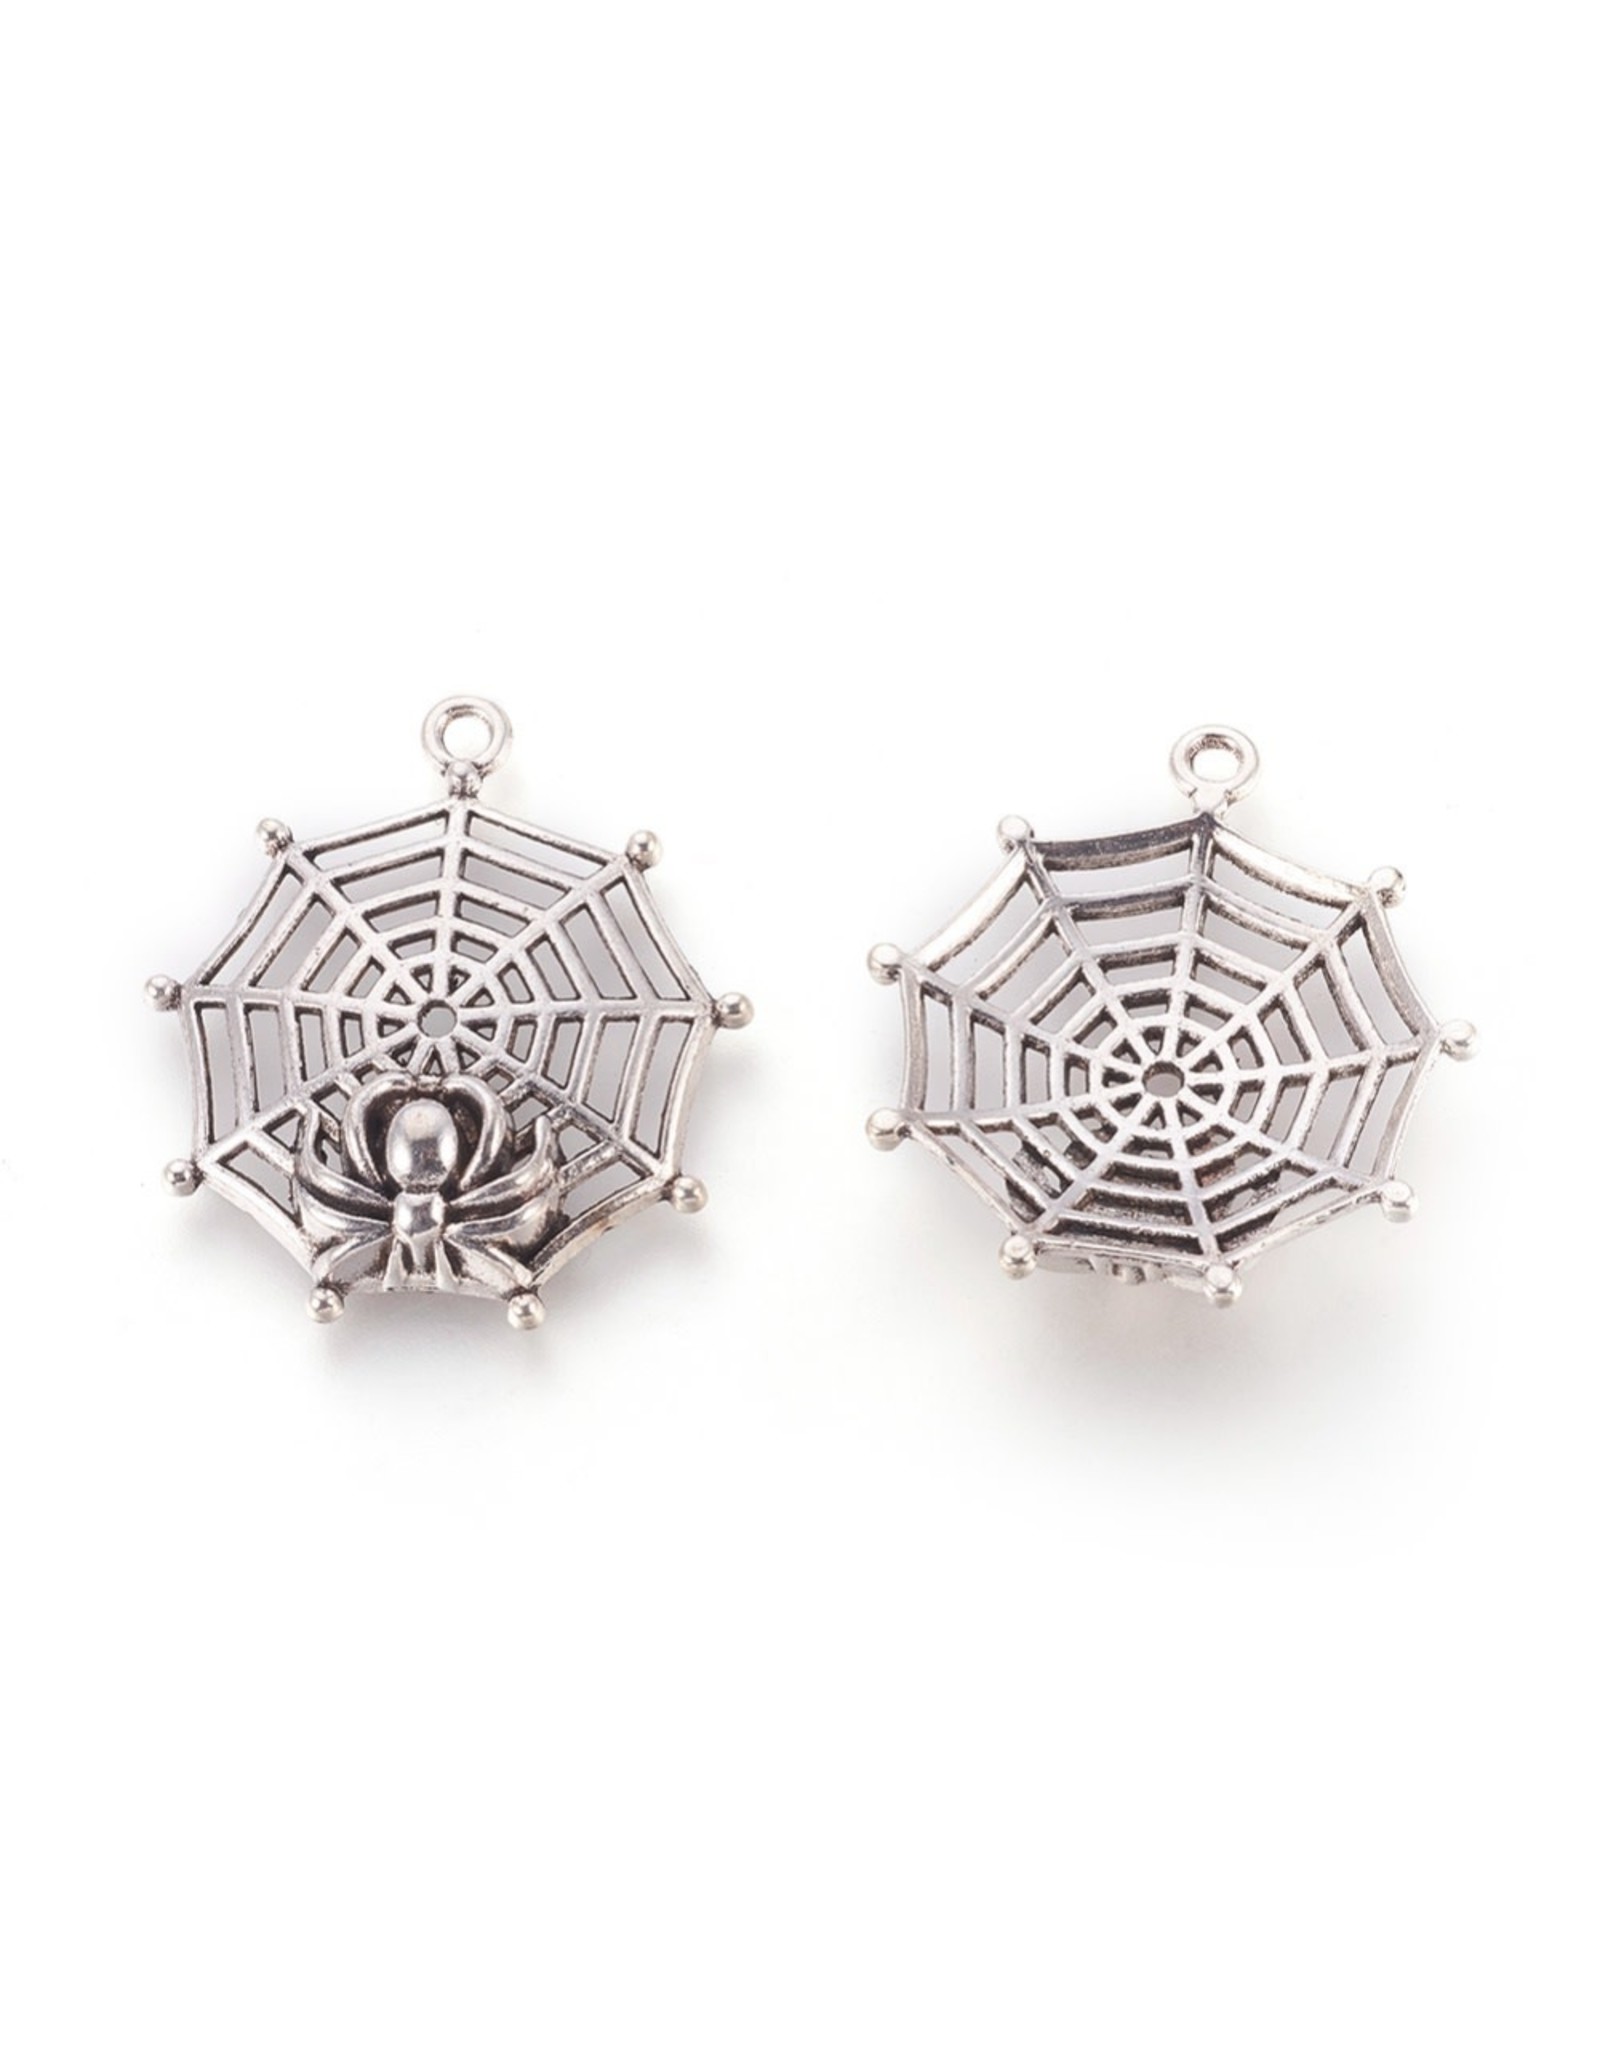 Spider and Web  31x27x6mm  Antique Silver   x24  NF